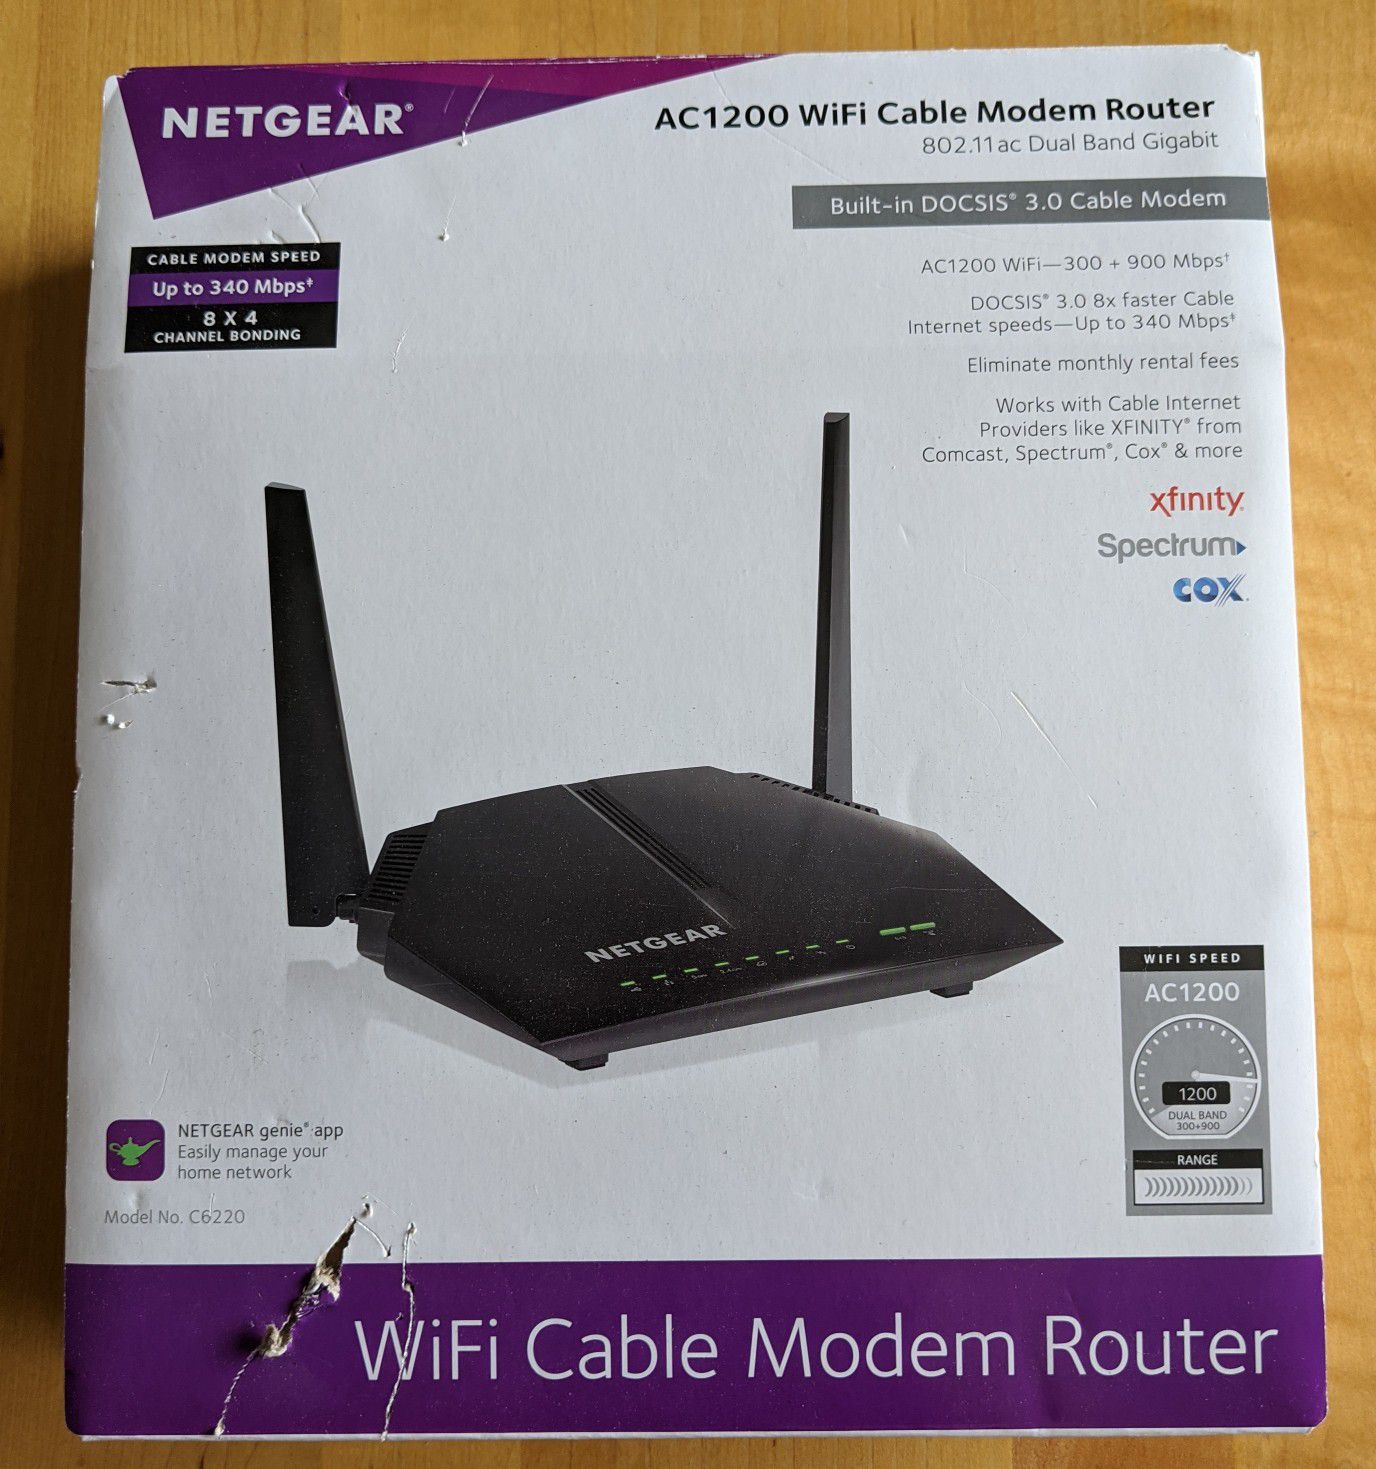 NETGEAR - Dual-Band AC1200 Router with 8 x 4 DOCSIS 3.0 Cable Modem - Black